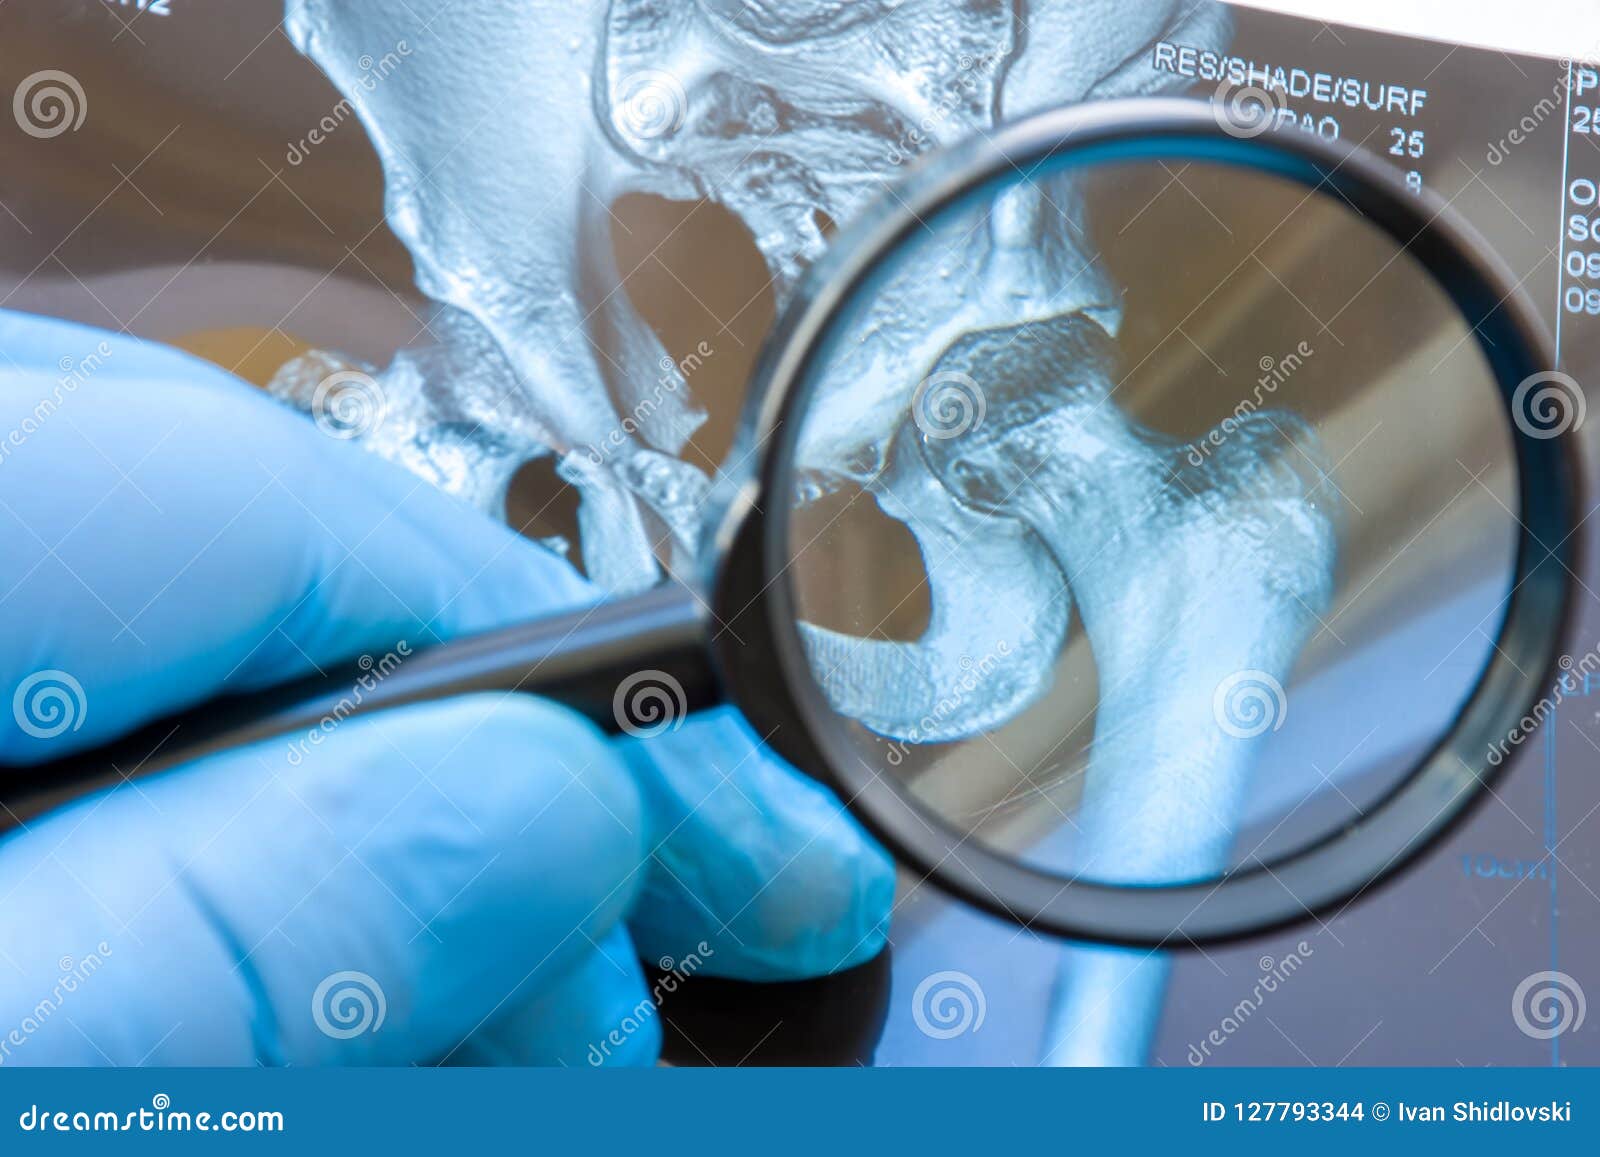 doctor examines mri snapshot of hip joint with magnifying glass. careful diagnosis rare and occurs widely hip joint diseases such